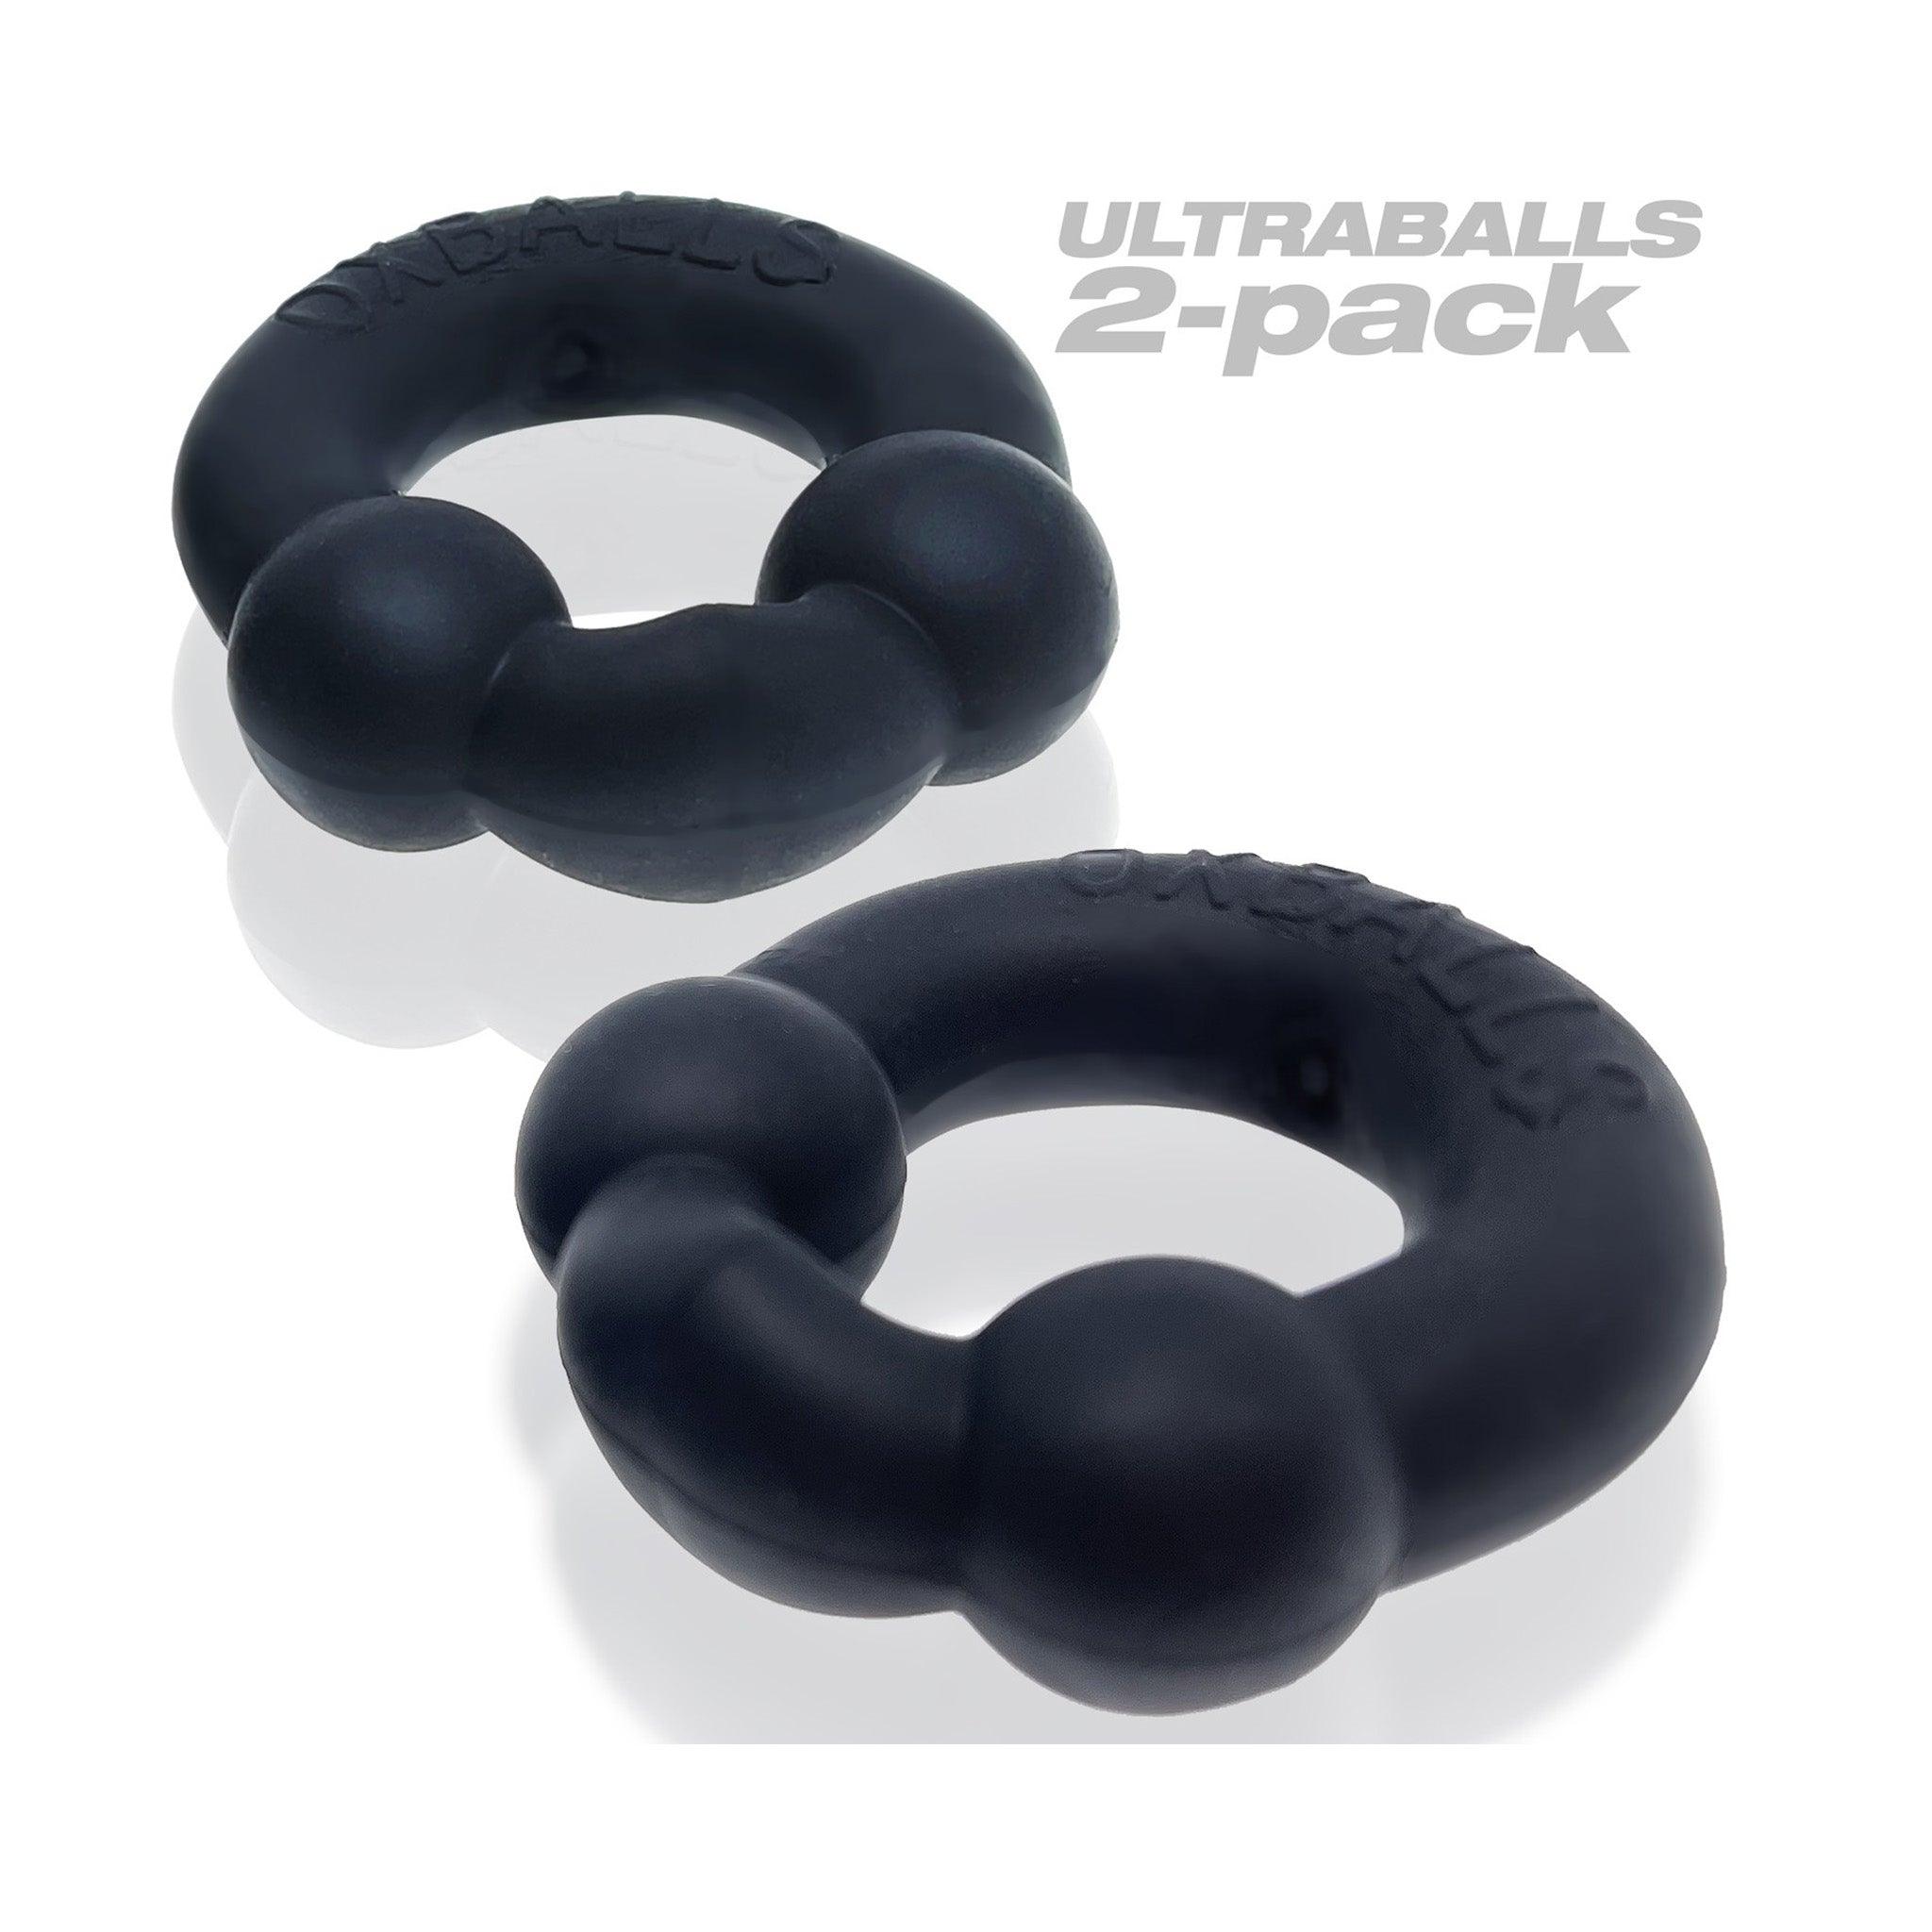 Oxballs ULTRABALLS 2-pack NIGHT EDITION cockrings PLUS+silicone - CheapLubes.com